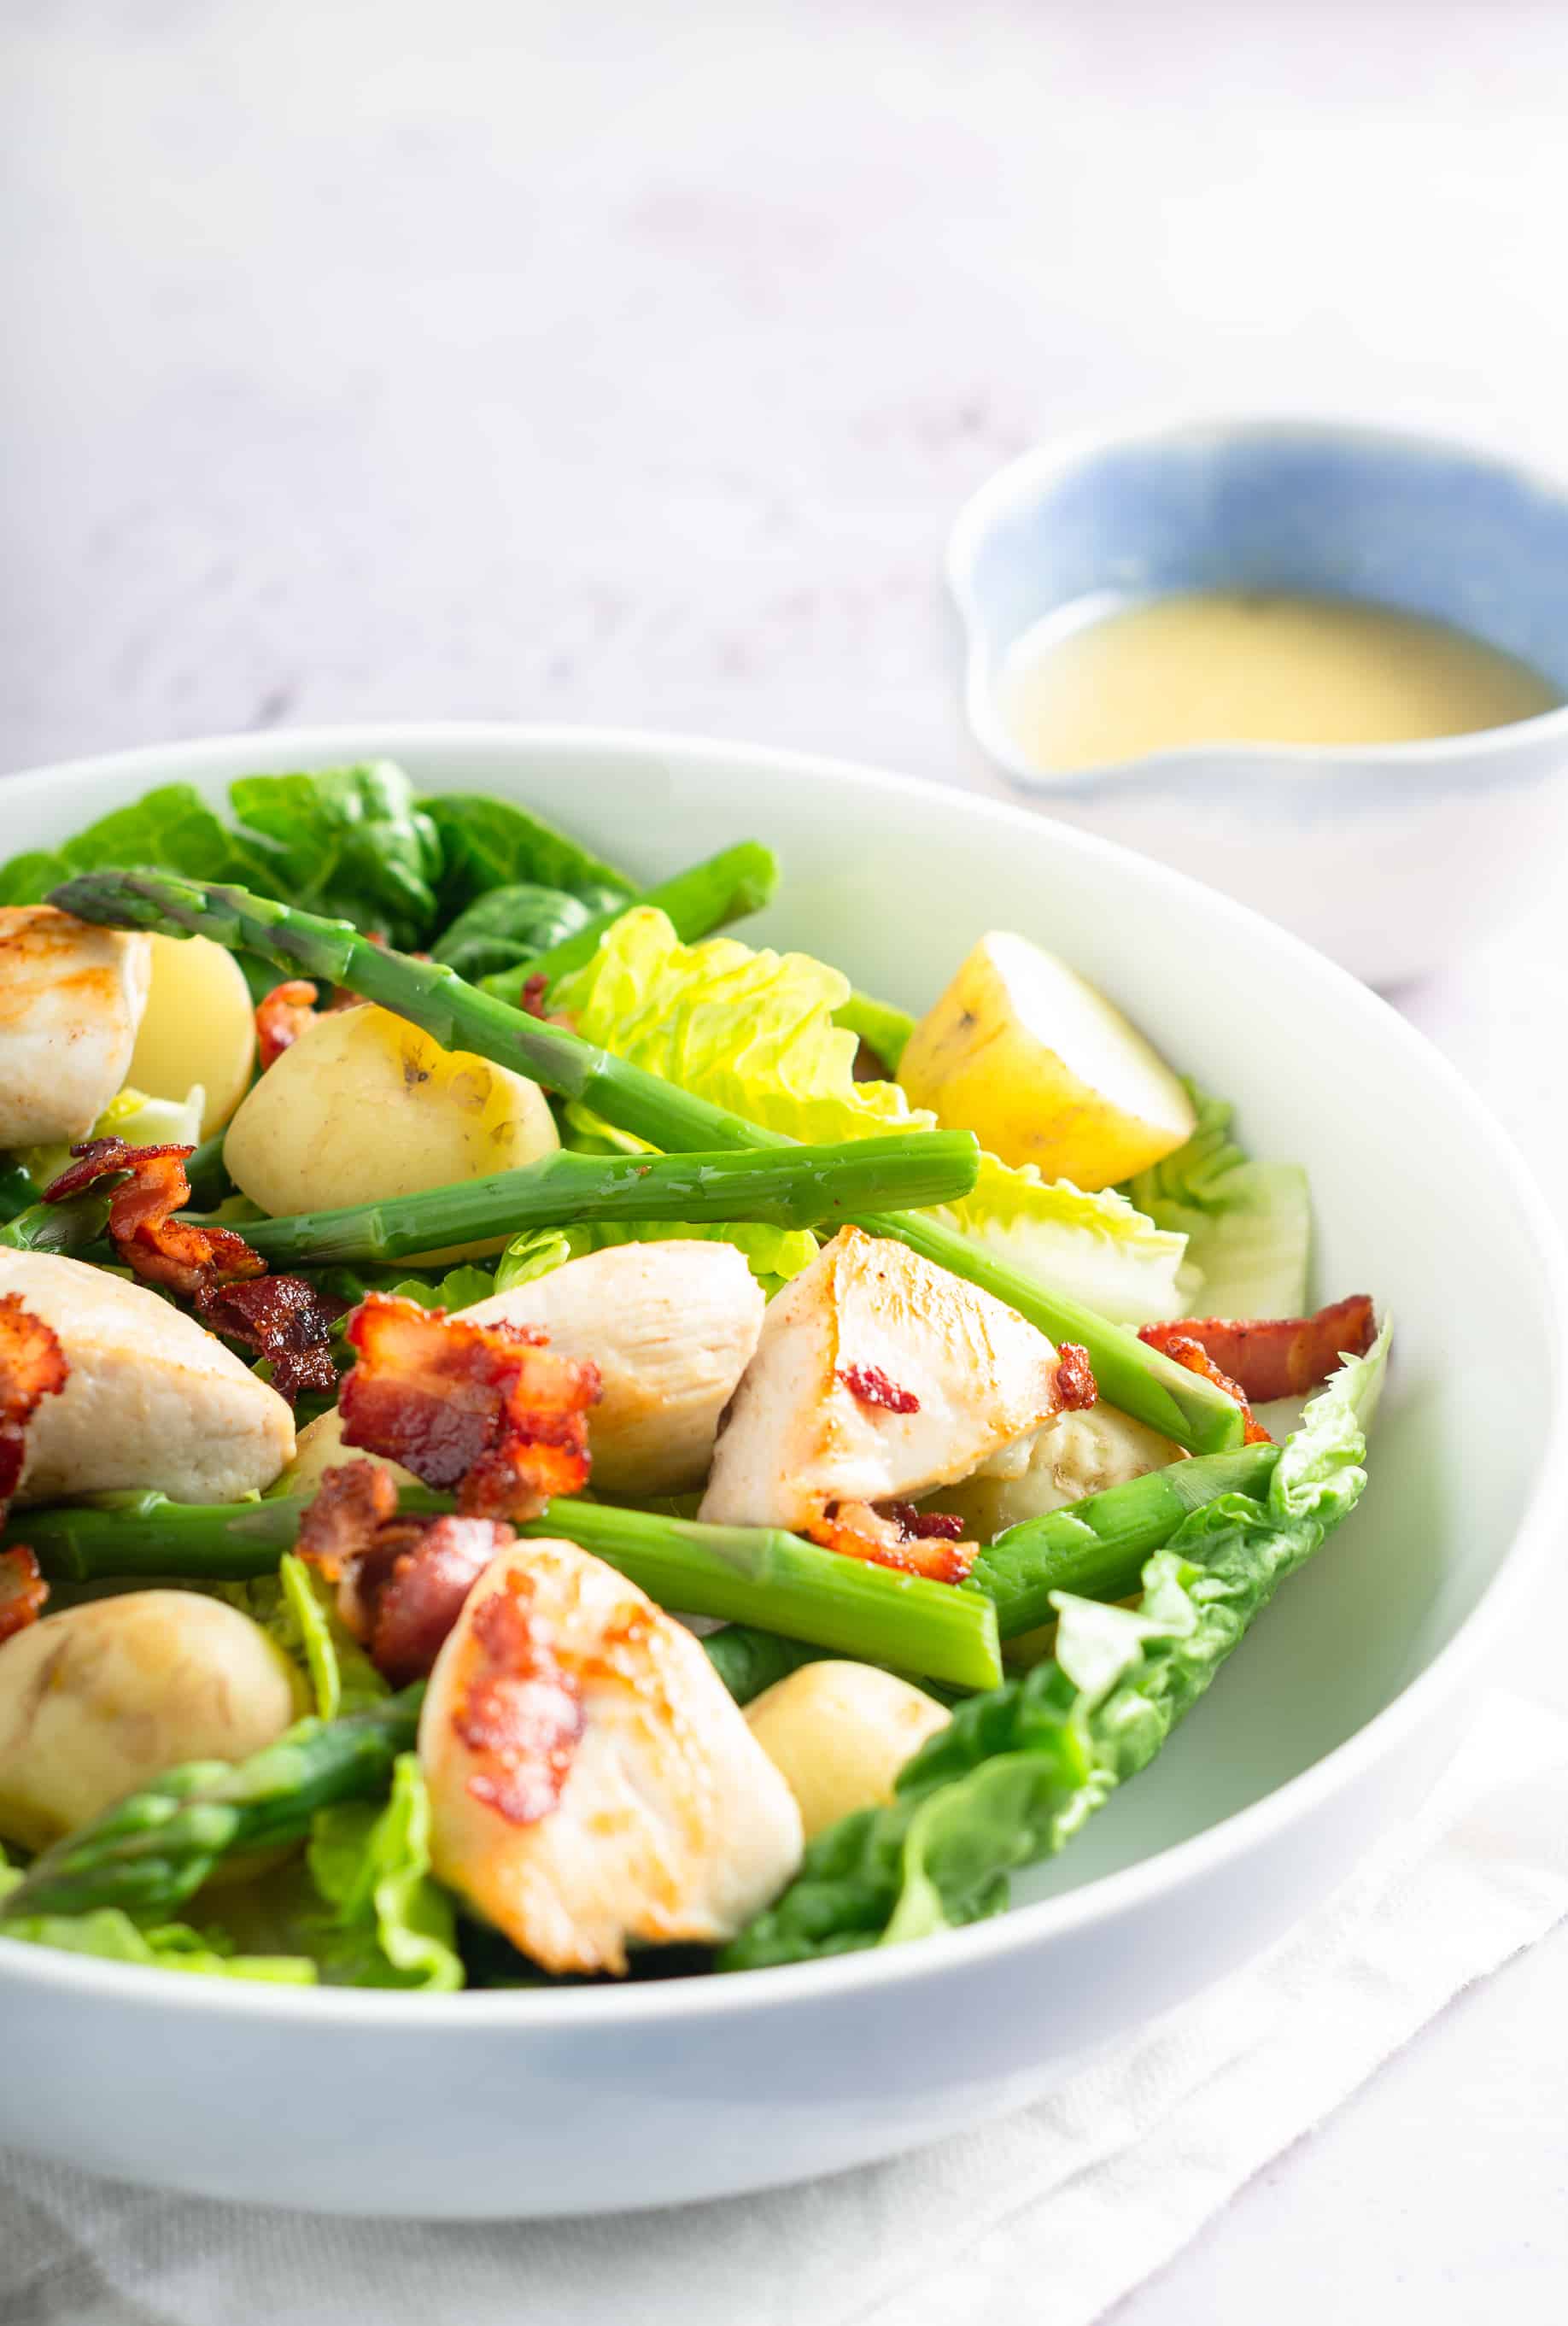 A spring bowl of salad with new potatoes, asparagus, crispy bacon and diced chicken in a white bowel and a blue bowl filled with salad dressing